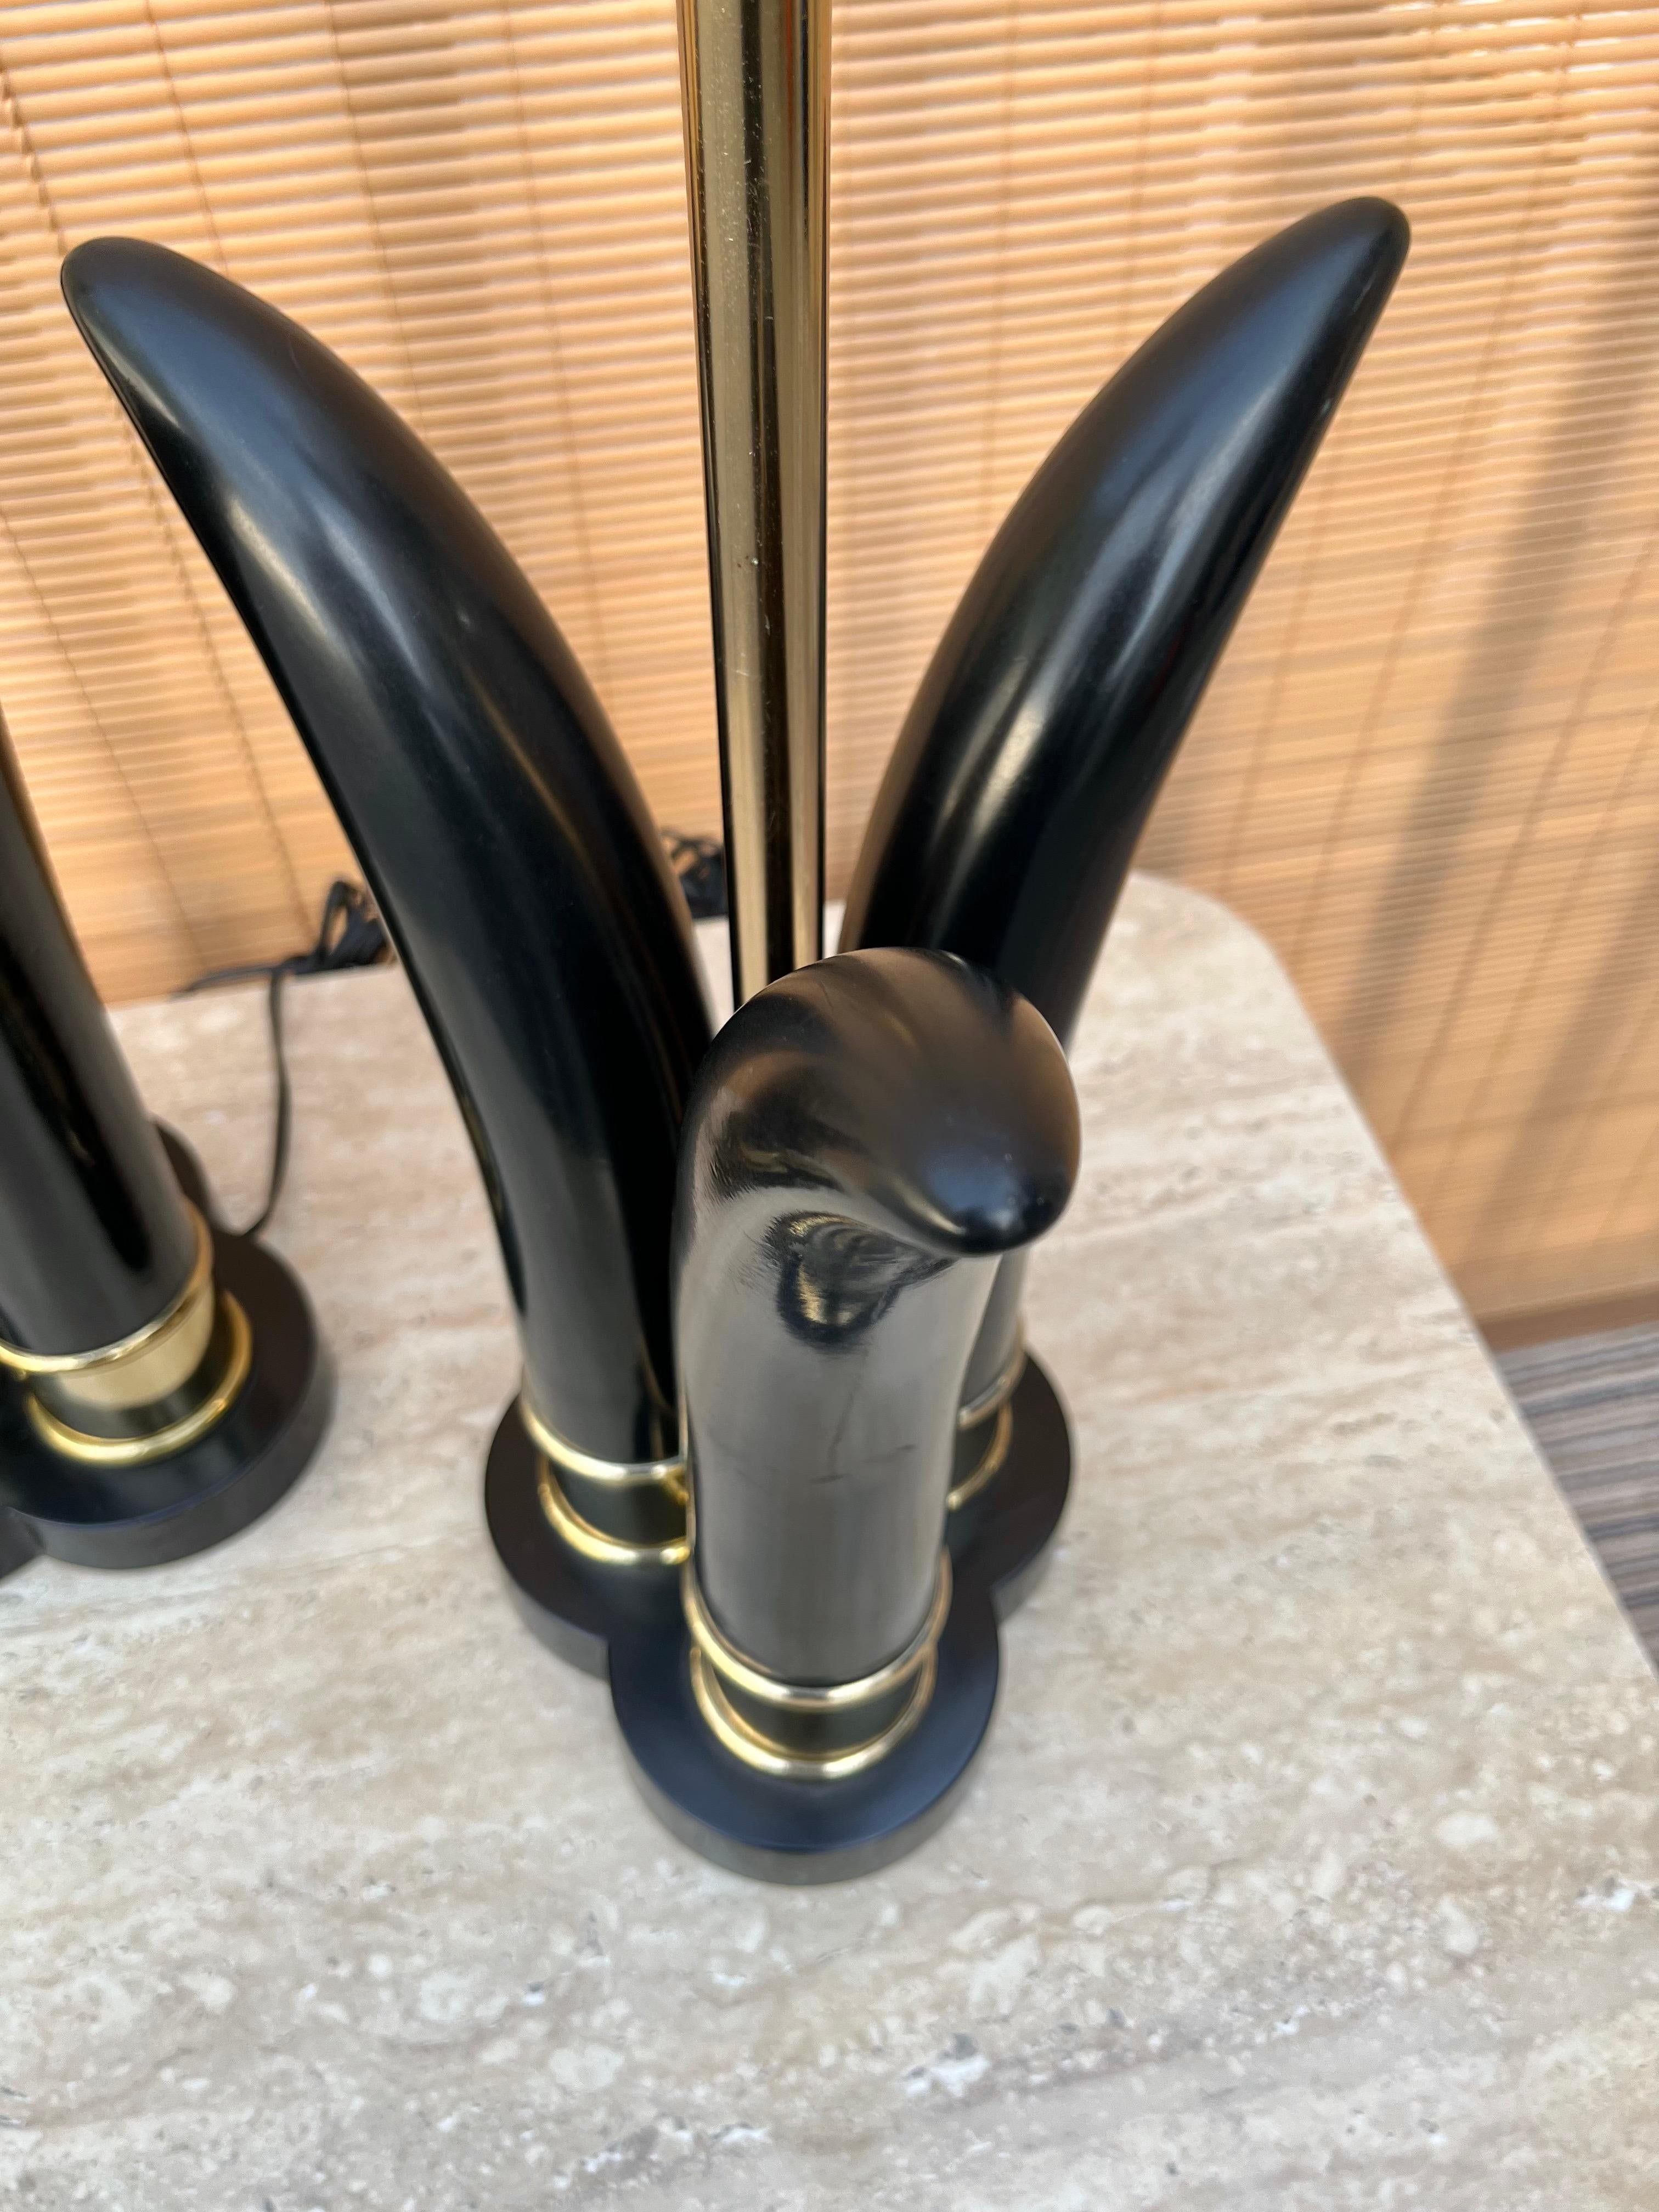 Pair of Mid-Century Modern Sculptural Black and Brass Table Lamps In Good Condition For Sale In Miami, FL